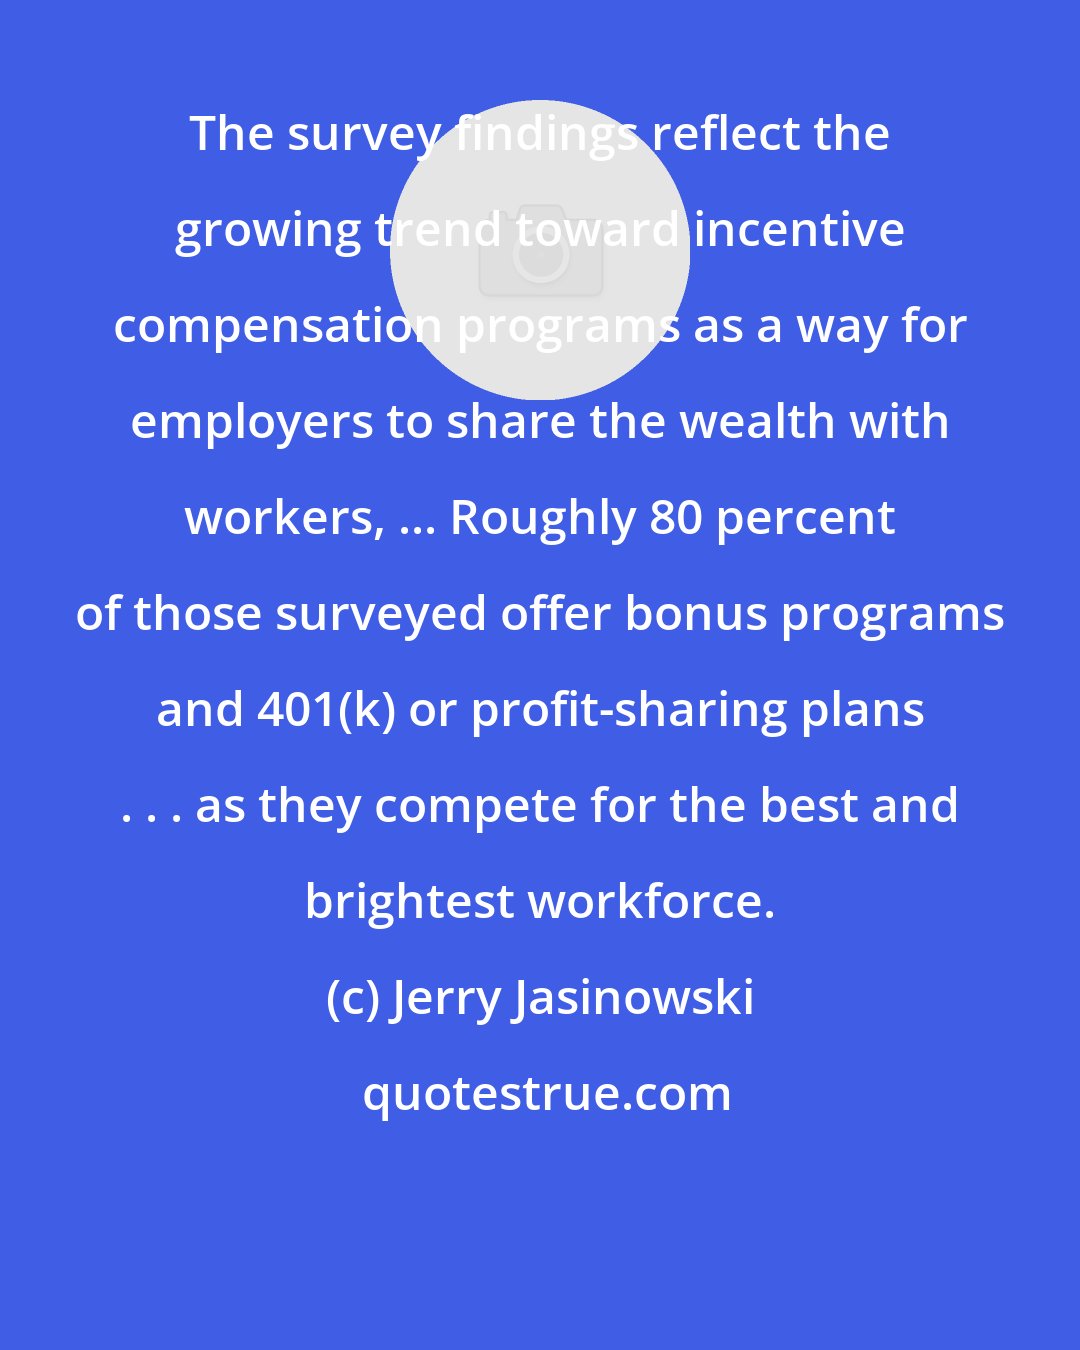 Jerry Jasinowski: The survey findings reflect the growing trend toward incentive compensation programs as a way for employers to share the wealth with workers, ... Roughly 80 percent of those surveyed offer bonus programs and 401(k) or profit-sharing plans . . . as they compete for the best and brightest workforce.